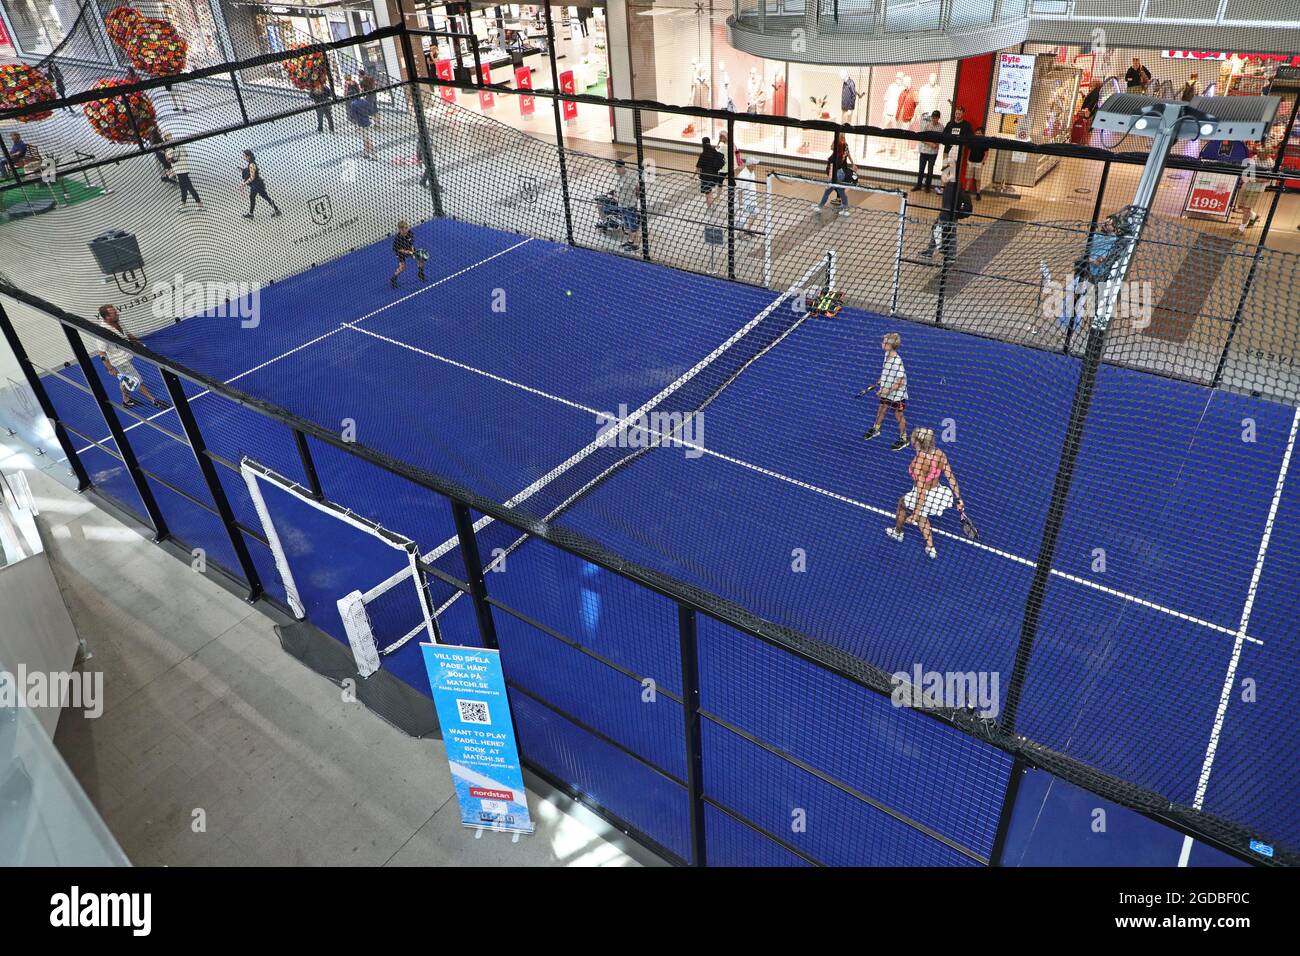 Some who play paddle tennis on a paddle tennis court in the shopping center Nordstan, Gothenburg. Stock Photo